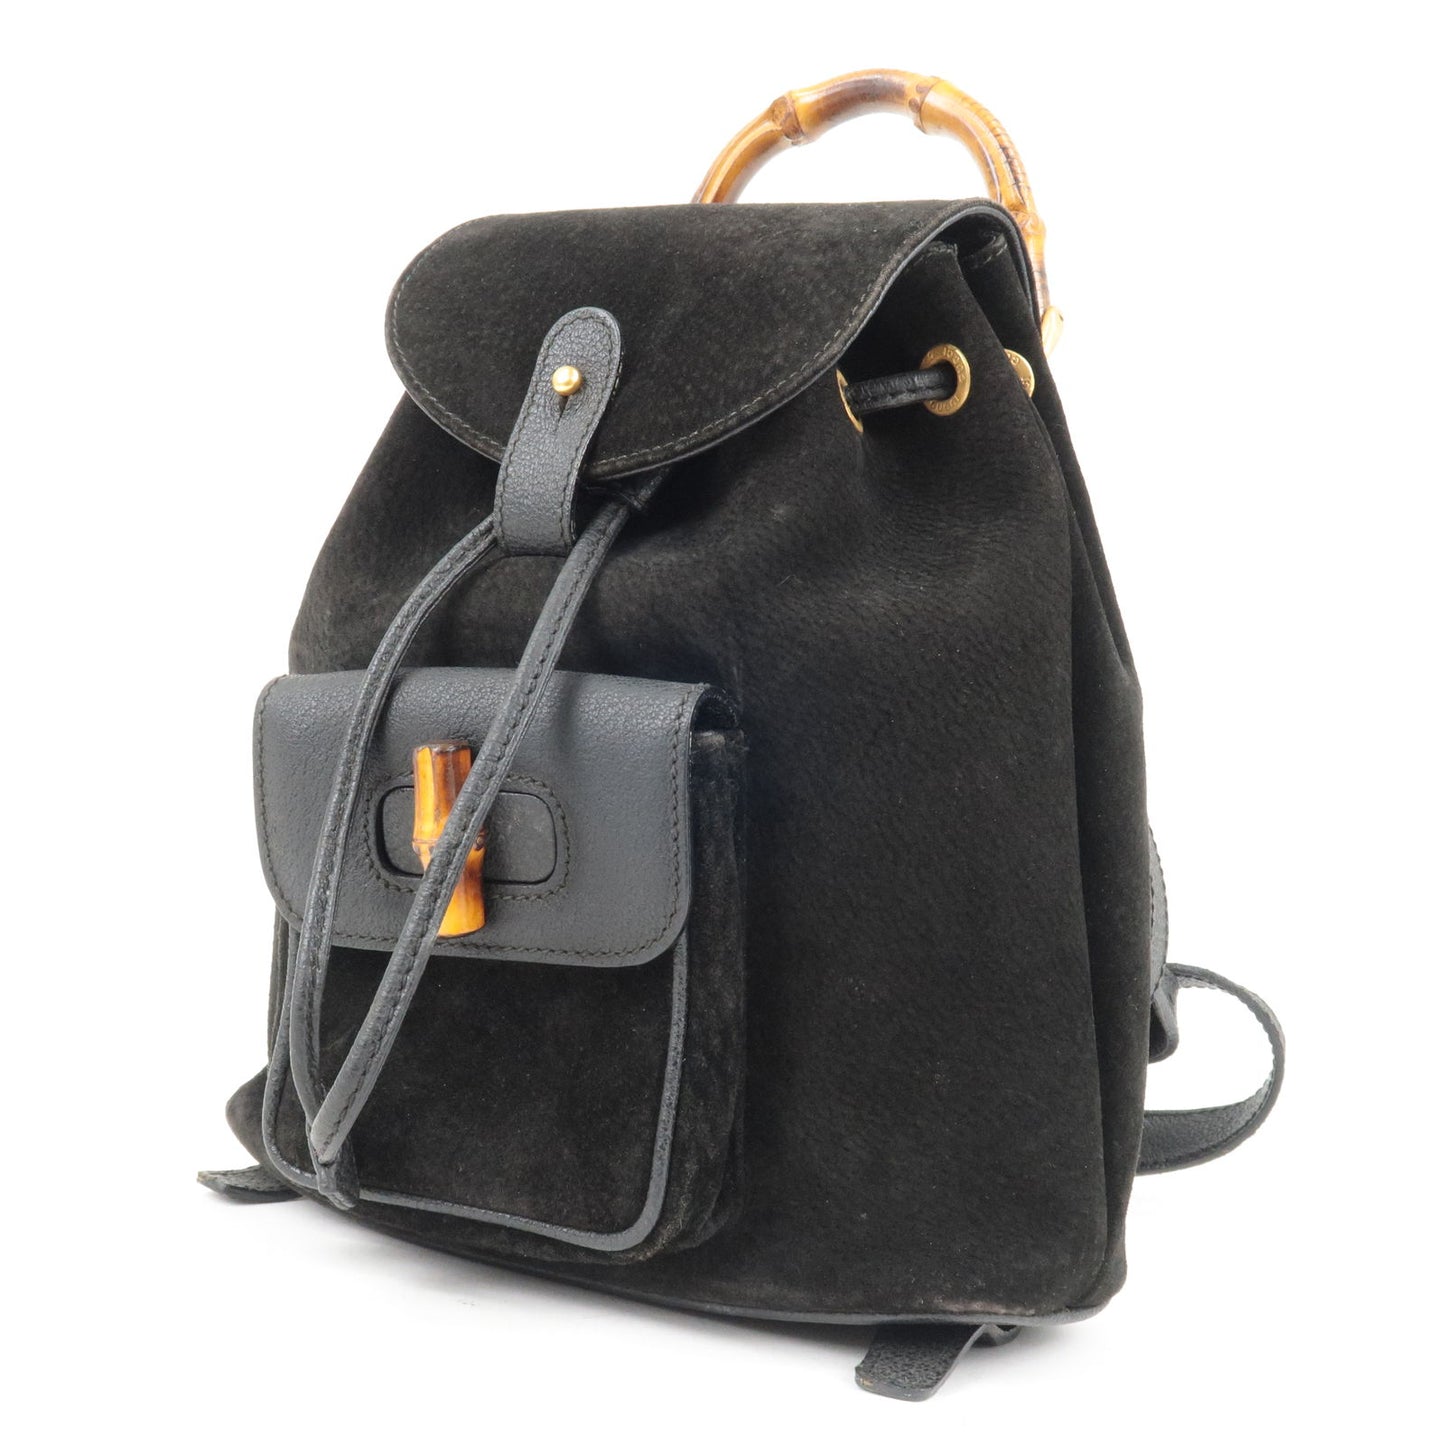 GUCCI Bamboo Suede Leather Ruck Sack Back Pack Black 003.2058.0030